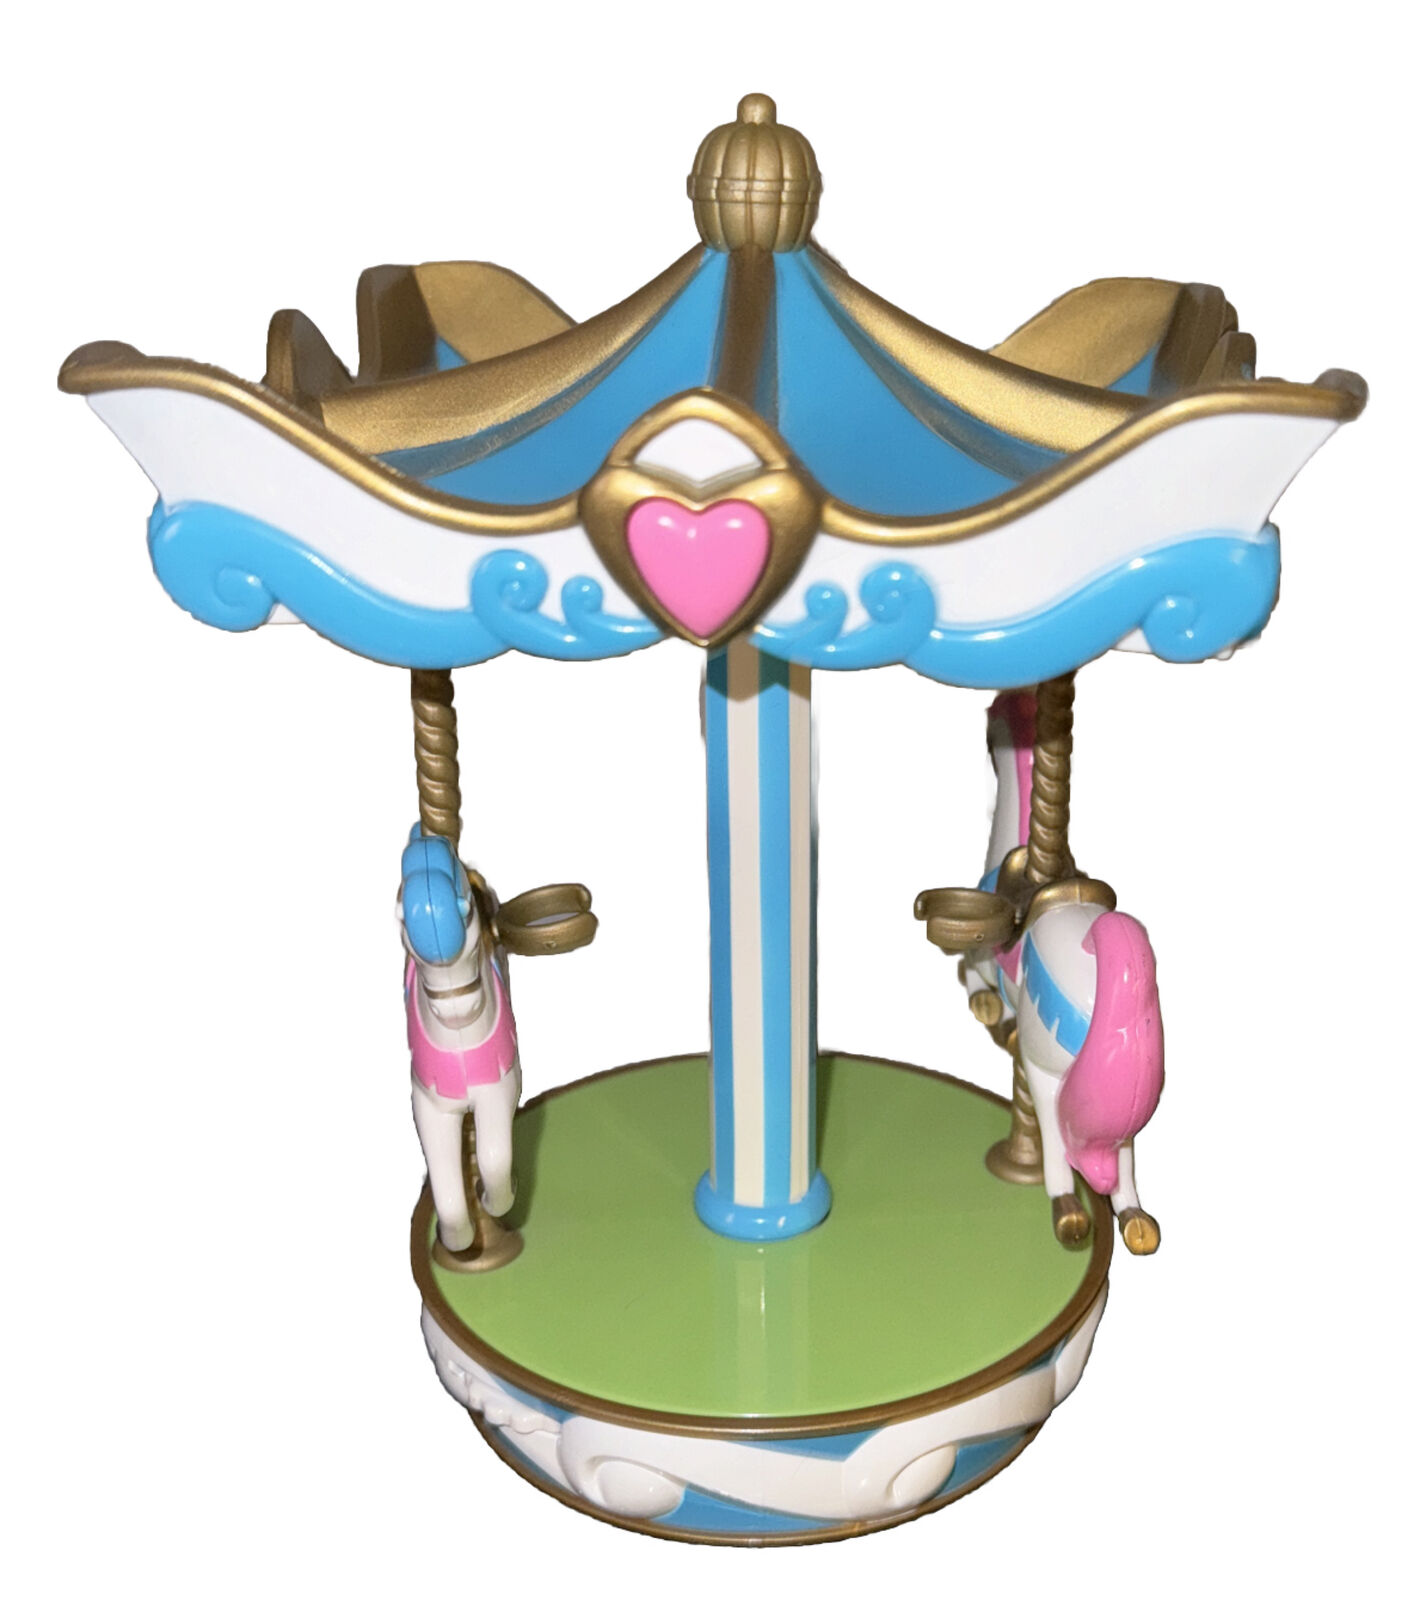 Disney Store Exclusive Sleeping Beauty Spinning Carousel